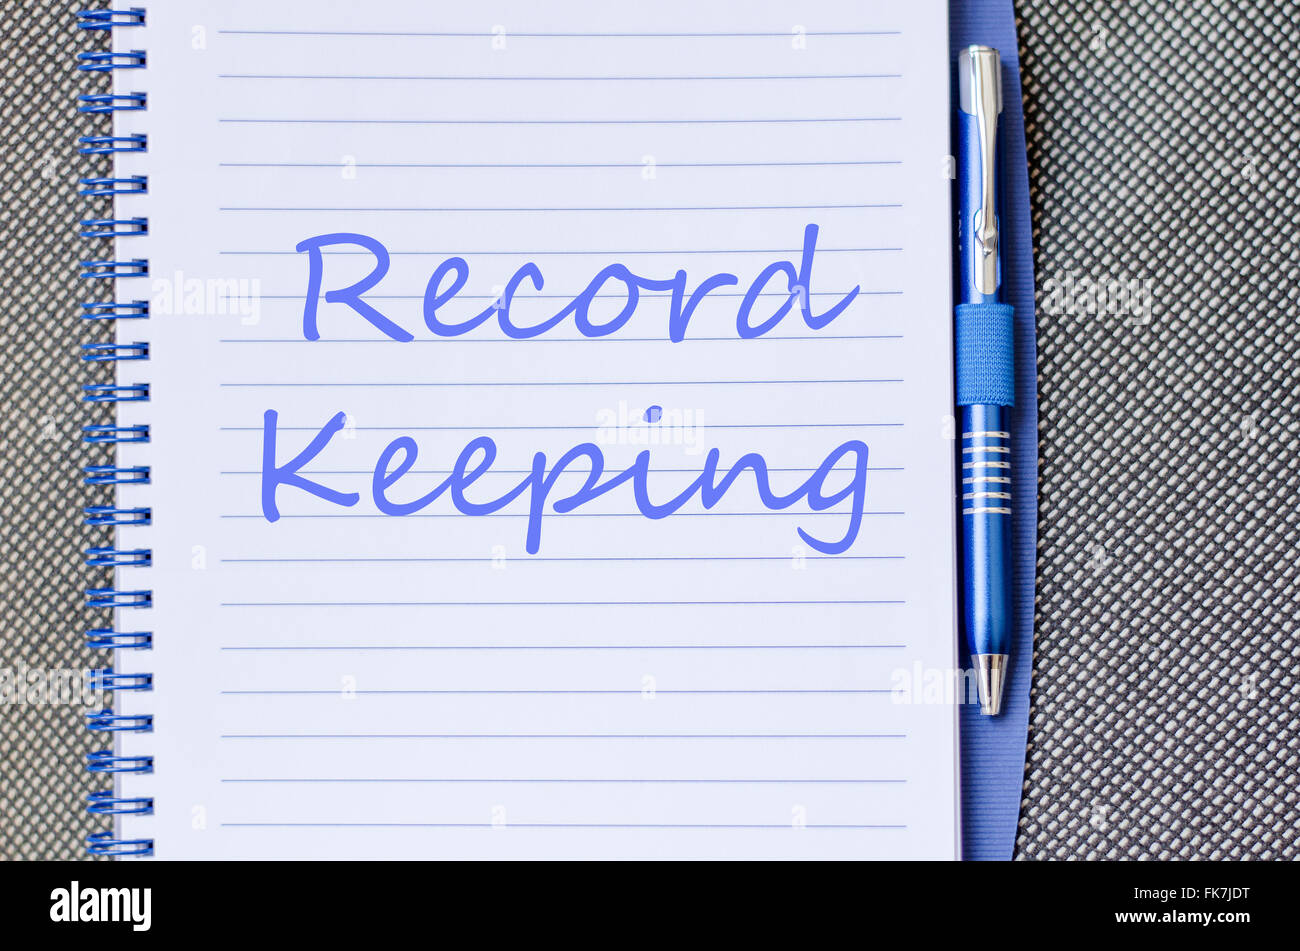 Record keeping text concept write on notebook with pen Stock Photo